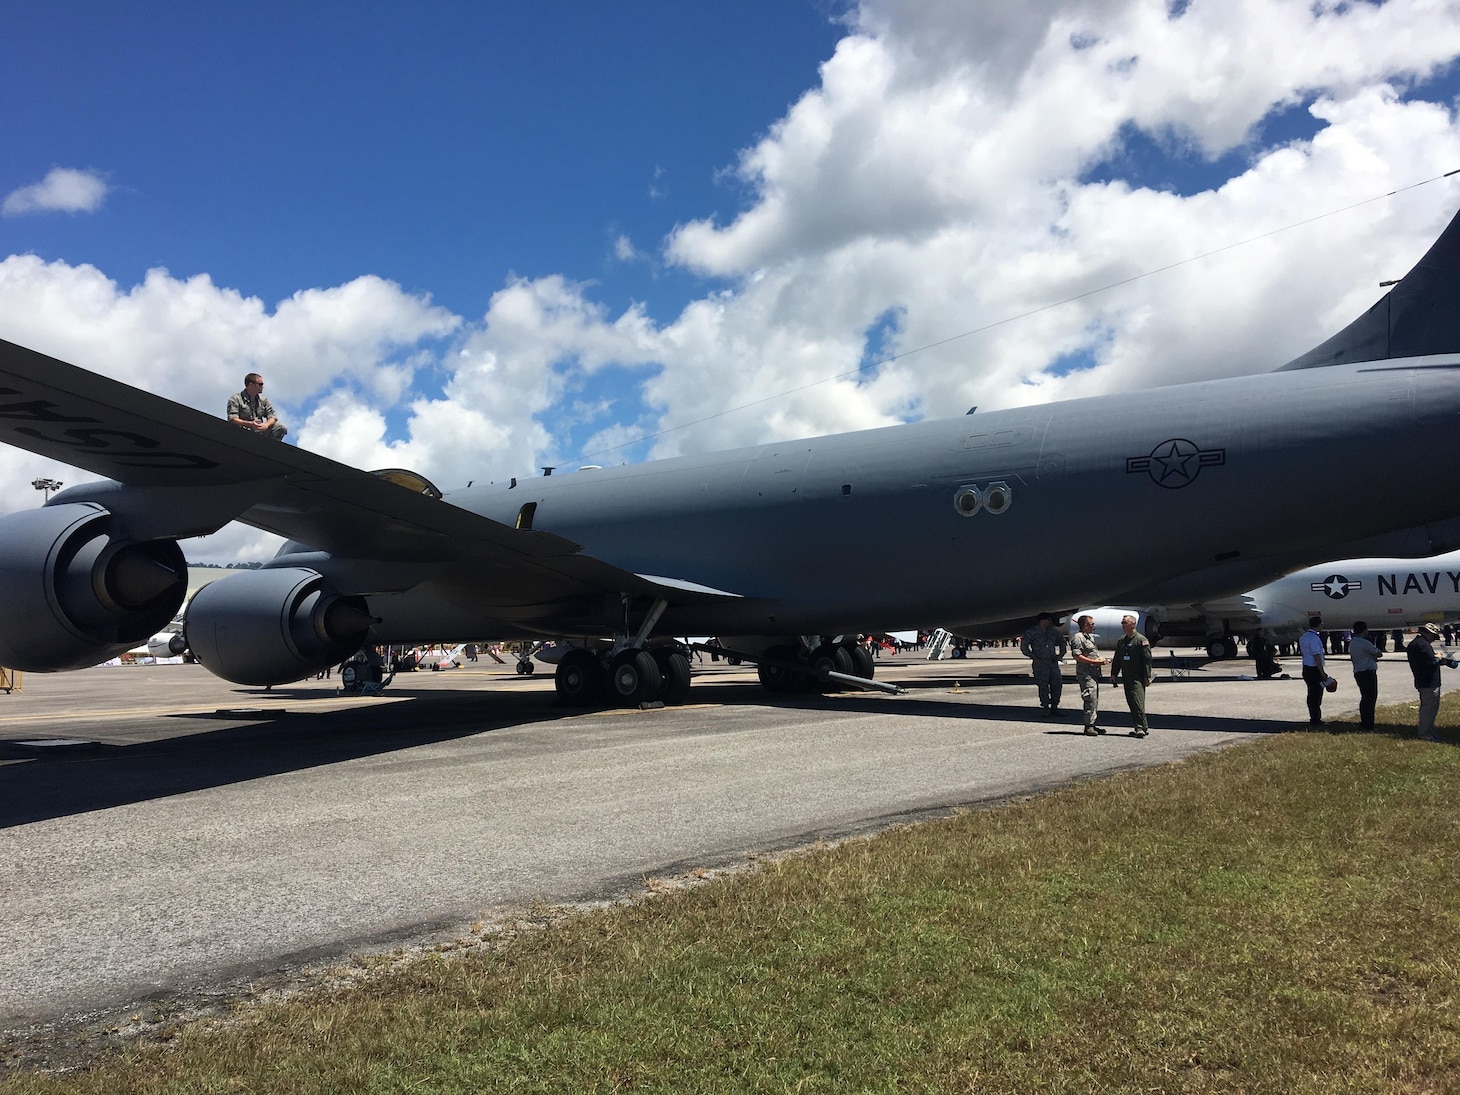 A U.S. Air Force KC-135 Stratotanker refueler with the 141st Air Refueling Wing of the Washington Air National Guard from Fairchild Air Force Base, Washington, is displayed during the Langkawi International Maritime and Aerospace Exhibition (LIMA) 2017 in Sirat, Malaysia, March 21, 2017. Events such as LIMA contribute to increased interoperability and security throughout the Indo-Asia-Pacific region. LIMA presents an opportunity for participants to focus on strengthening military-to-military ties. (U.S. Air Force photo by Capt Jessica Clark)